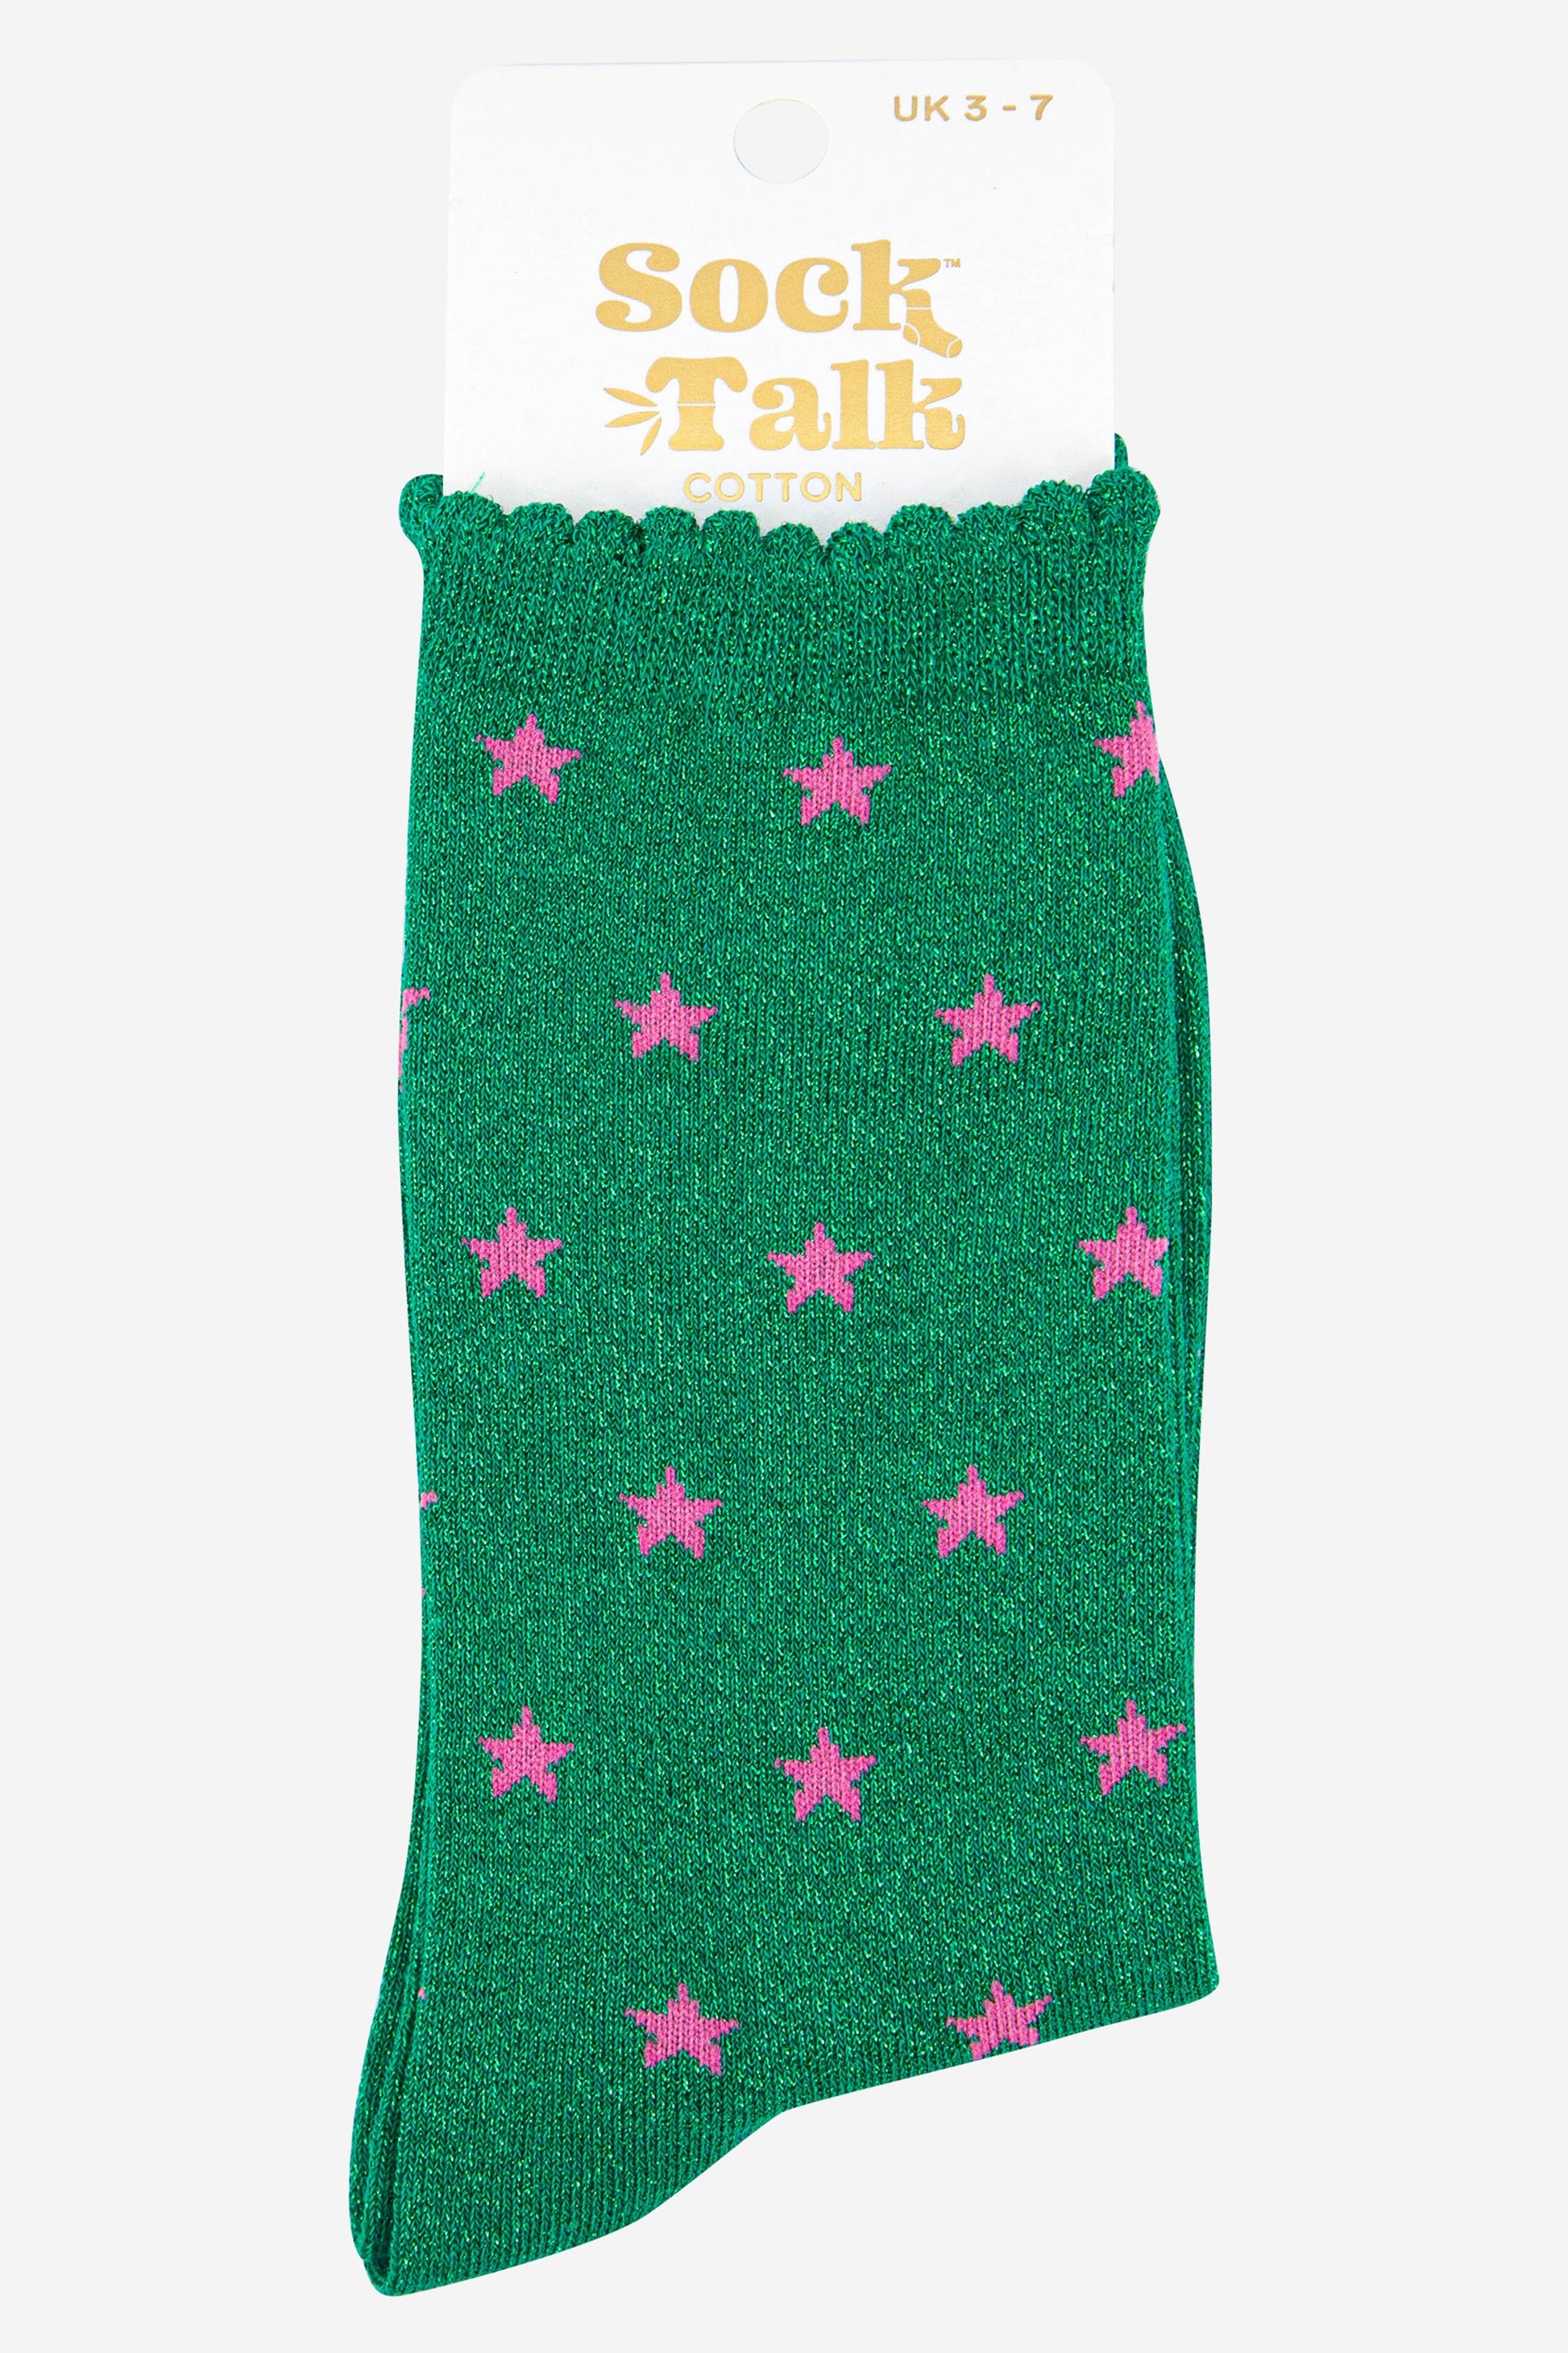 green glitter ankle socks with pink stars uk size 3-7